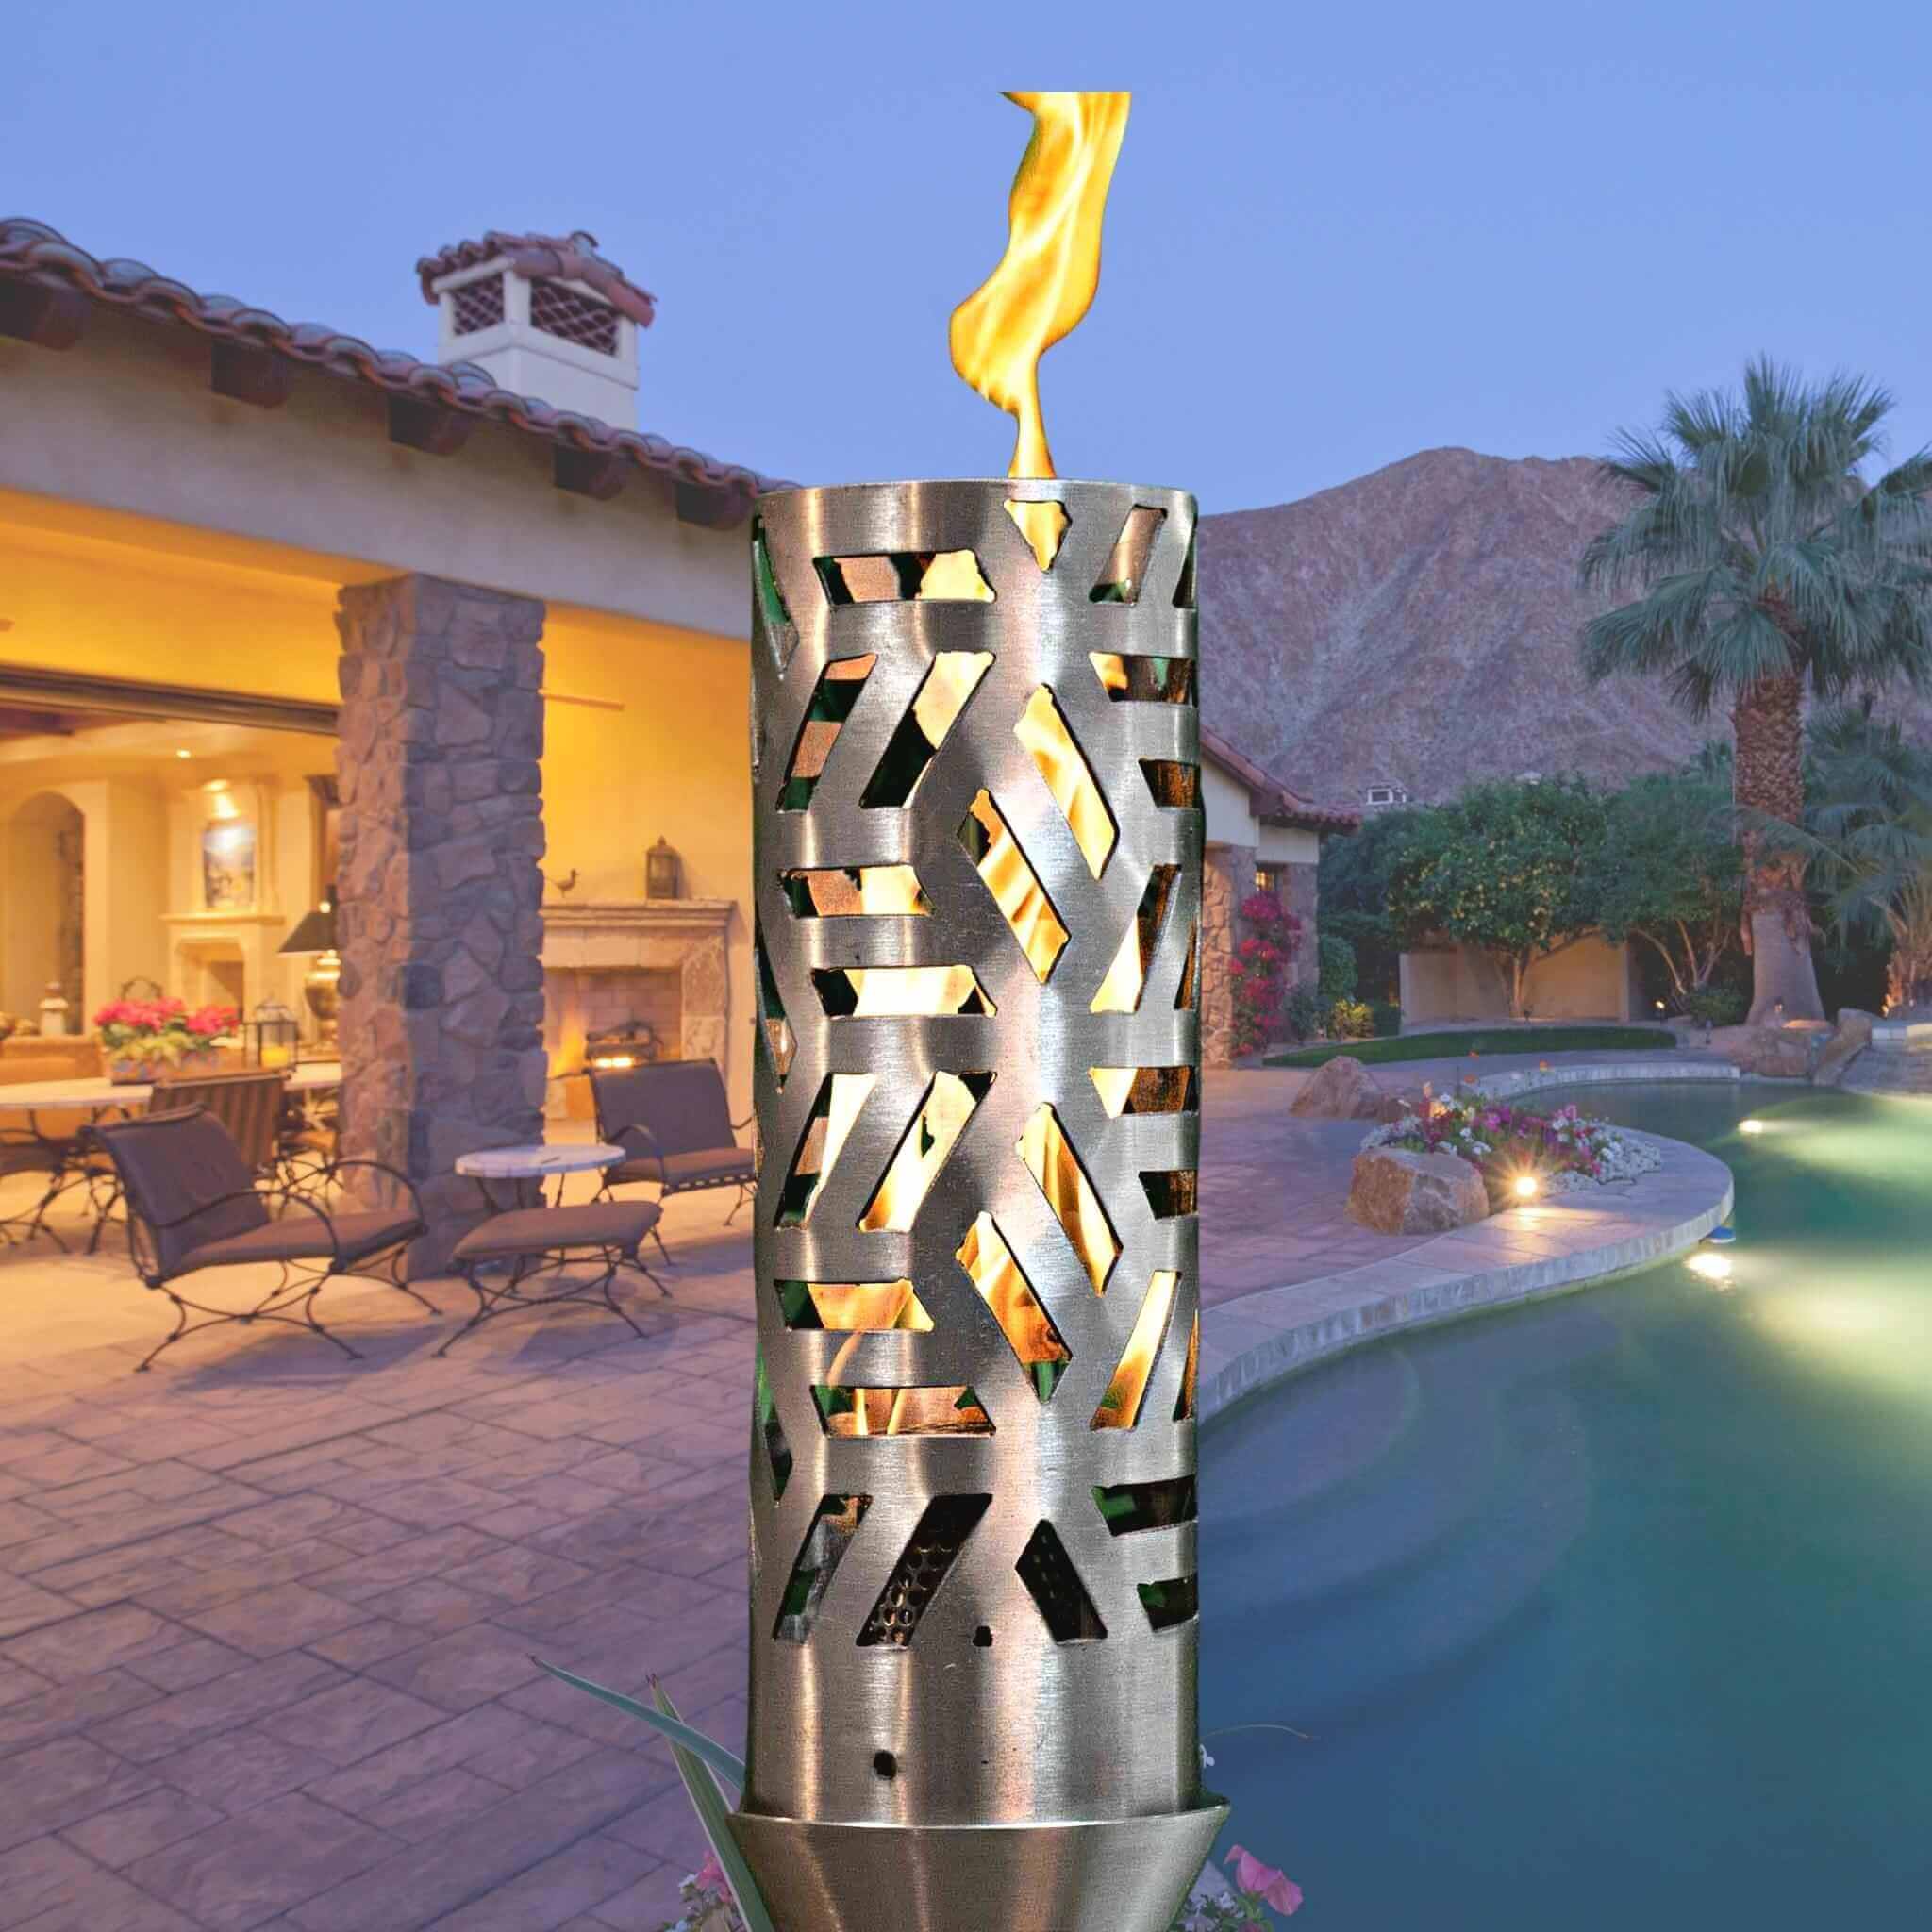 Cubist Fire Torch COMPLETE KIT - Stainless Steel - The Outdoor Plus